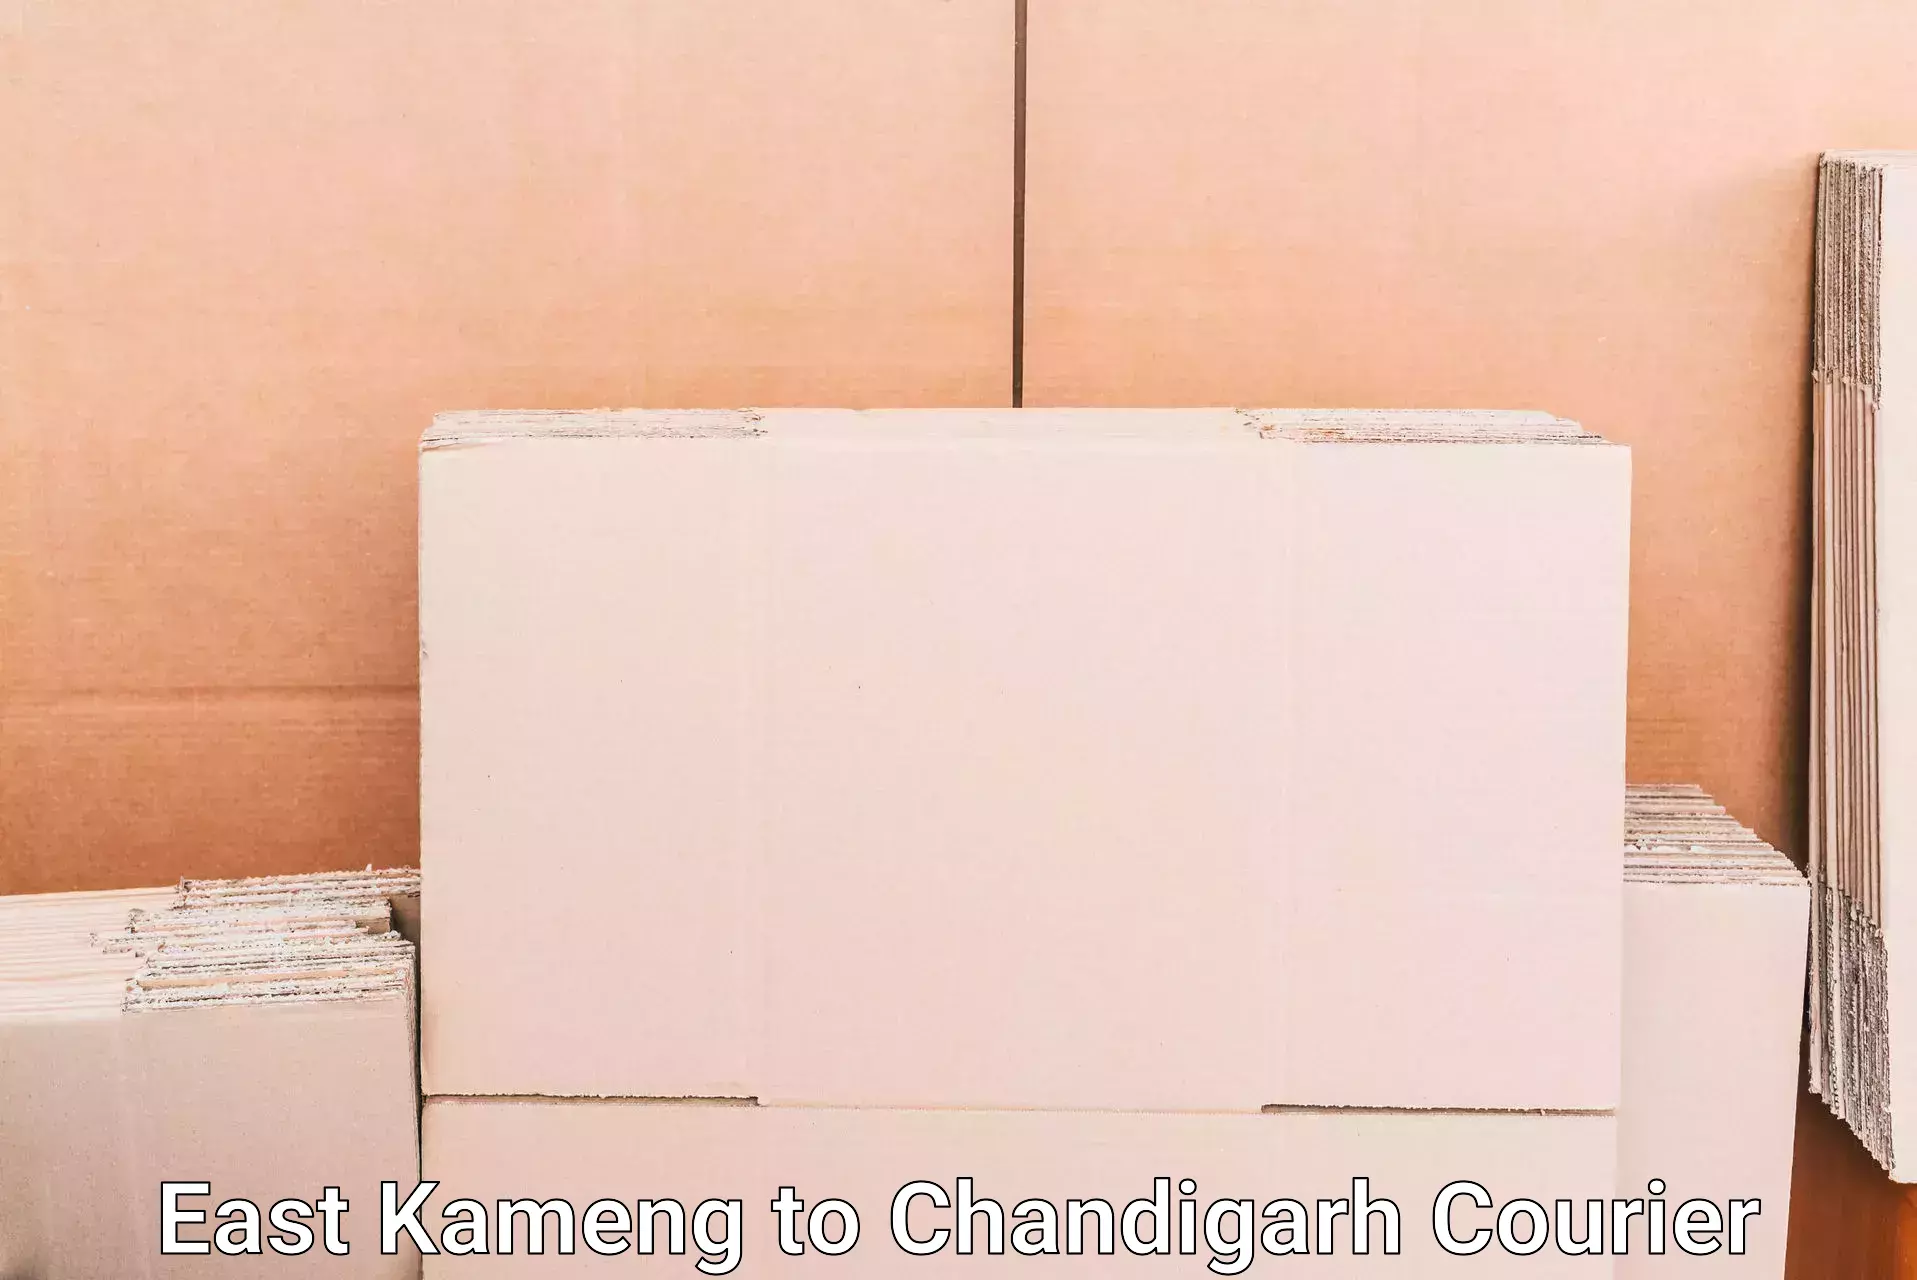 Luggage transport solutions East Kameng to Chandigarh